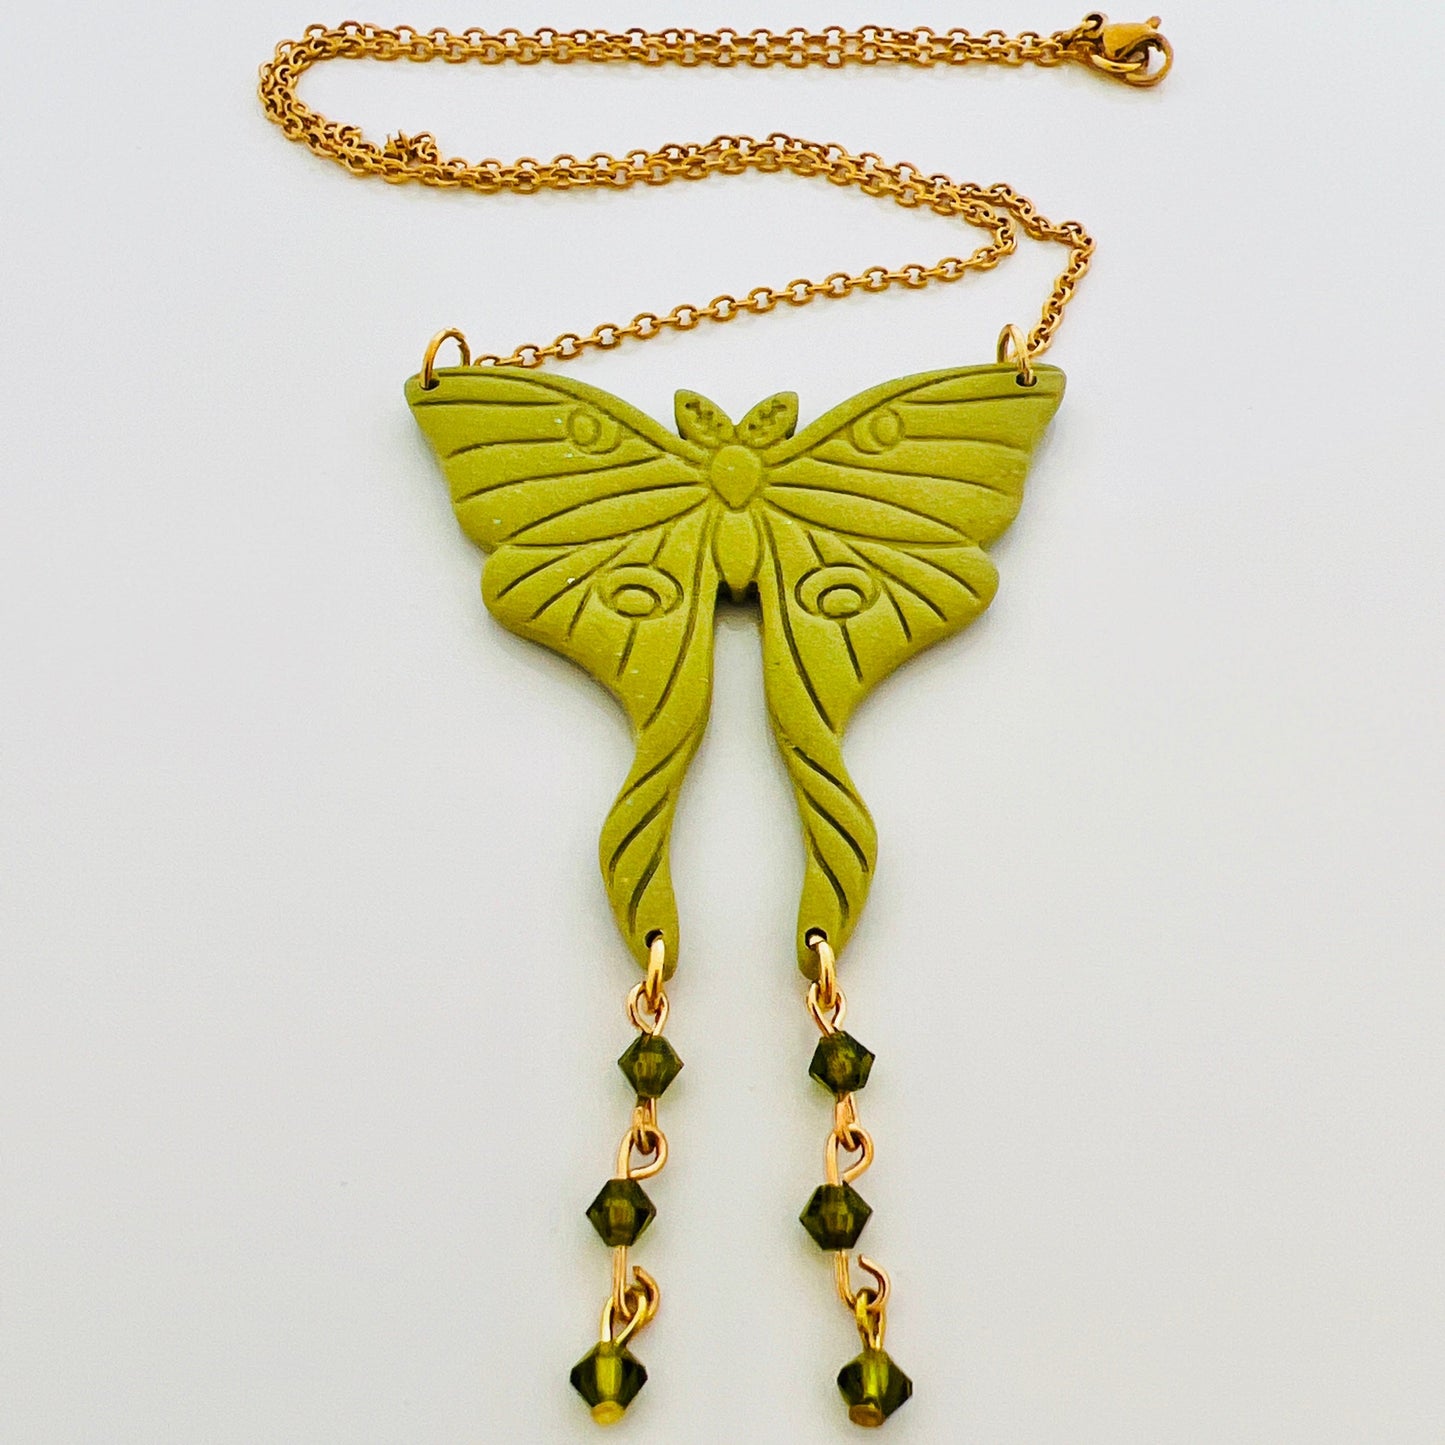 Necklace Olive Green & Gold with Olivine Bicone Beads Moth Necklace with Beads